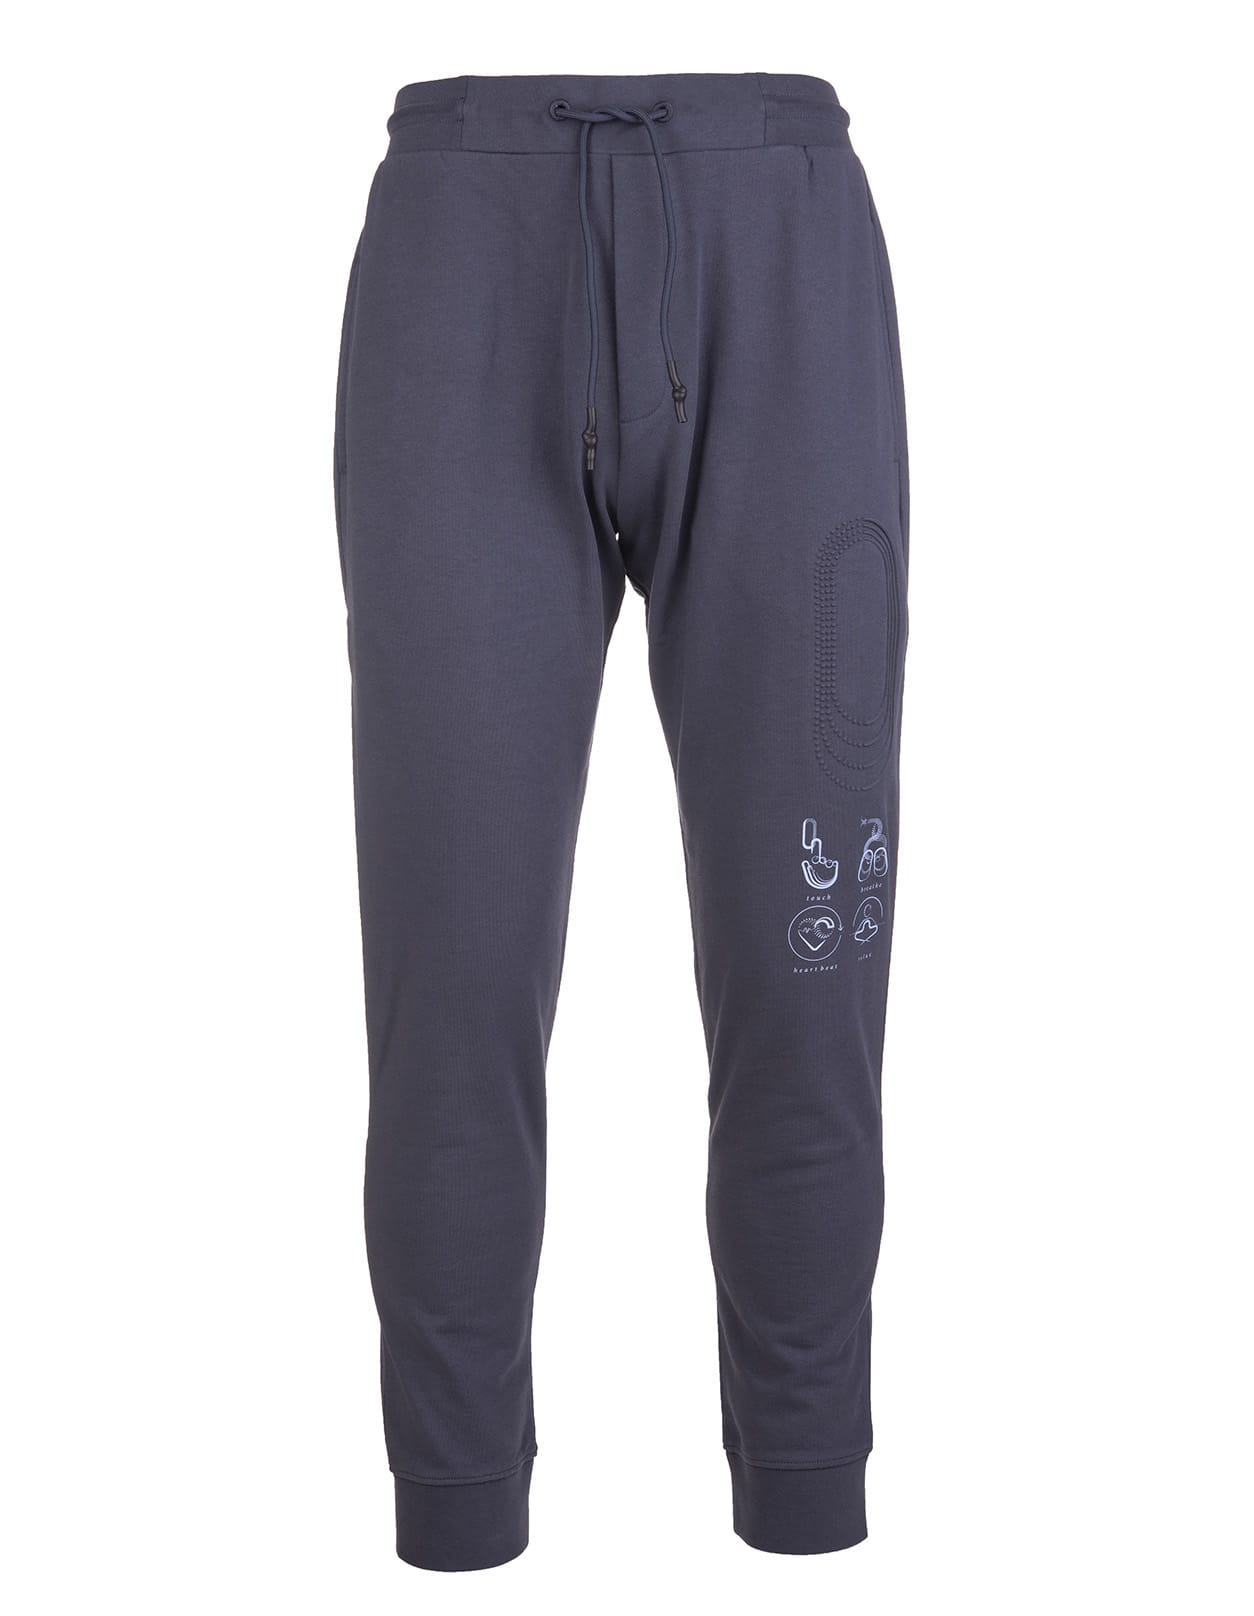 McQ Alexander McQueen Dark Grey Joggers With Breathe Prints And Patches